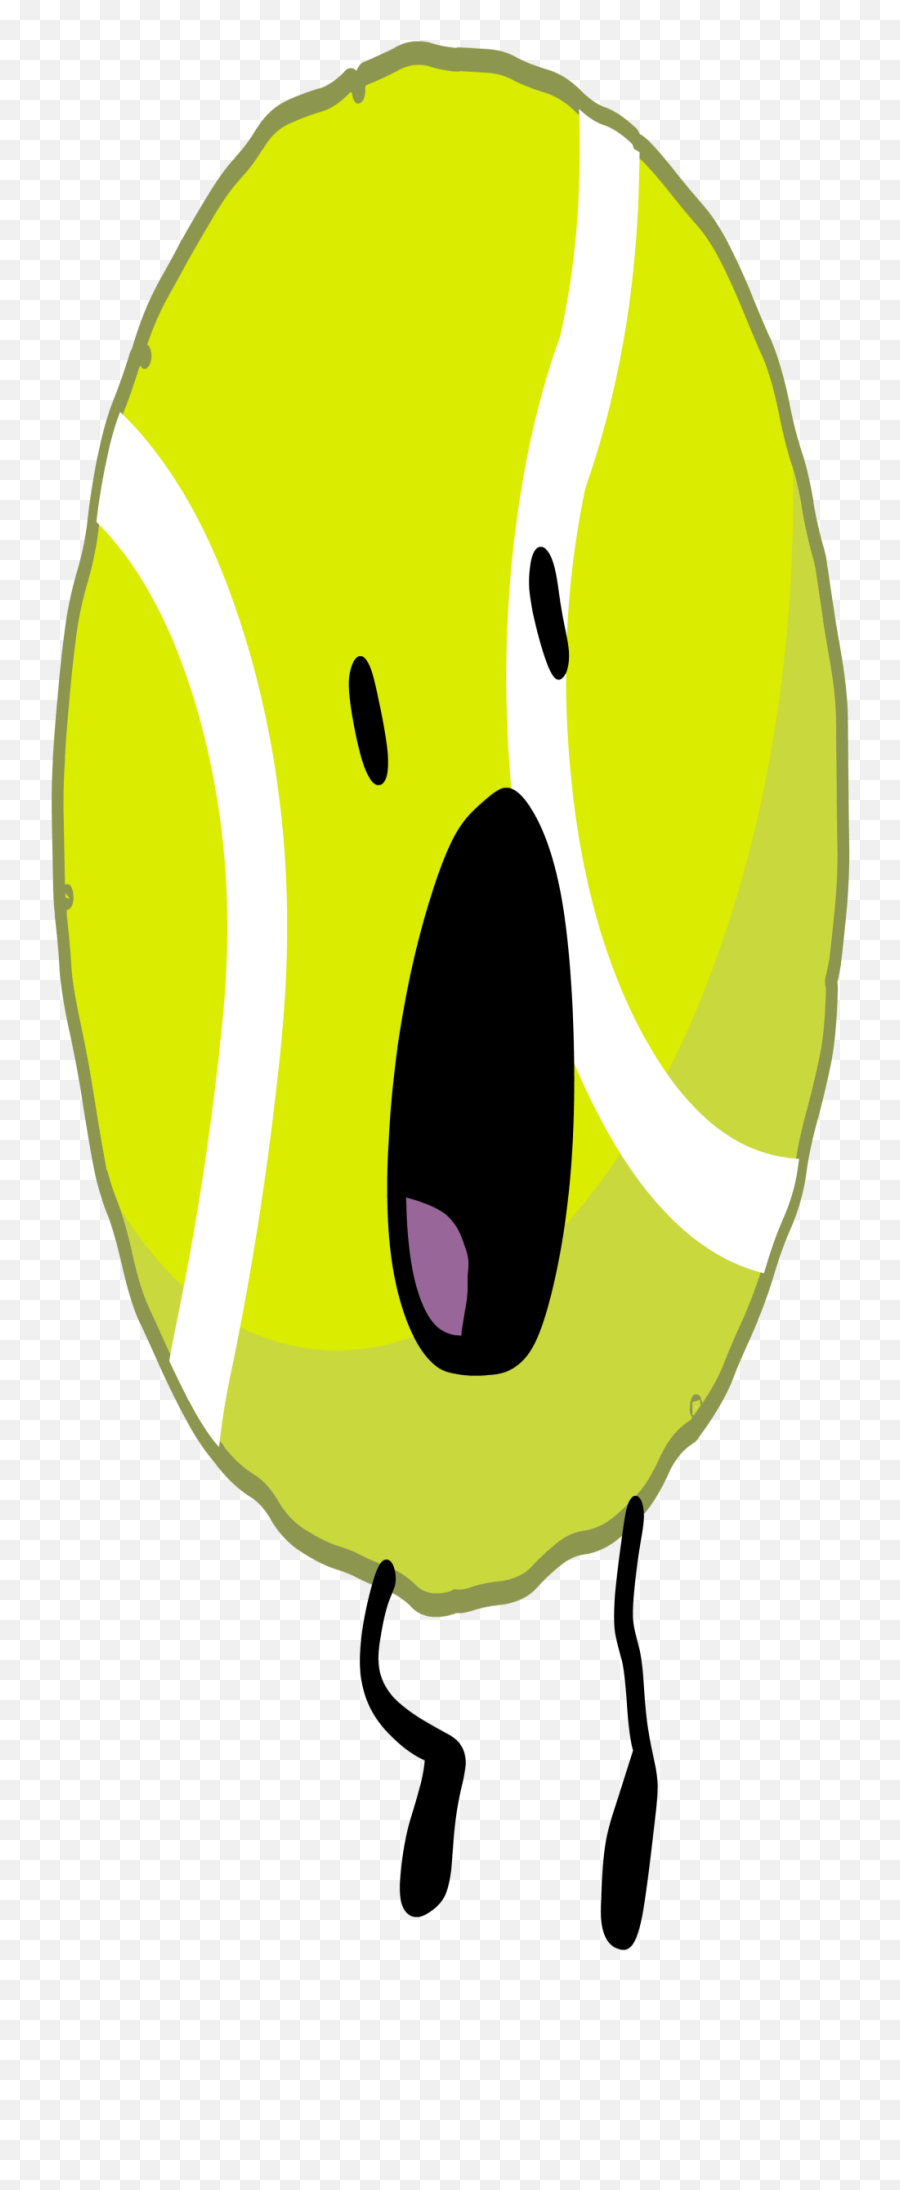 Compressed Tennis Ball Joke Battle For A Bad Prize Wiki - Golf Ball Bfb Tennis Ball Png,Tennis Ball Icon